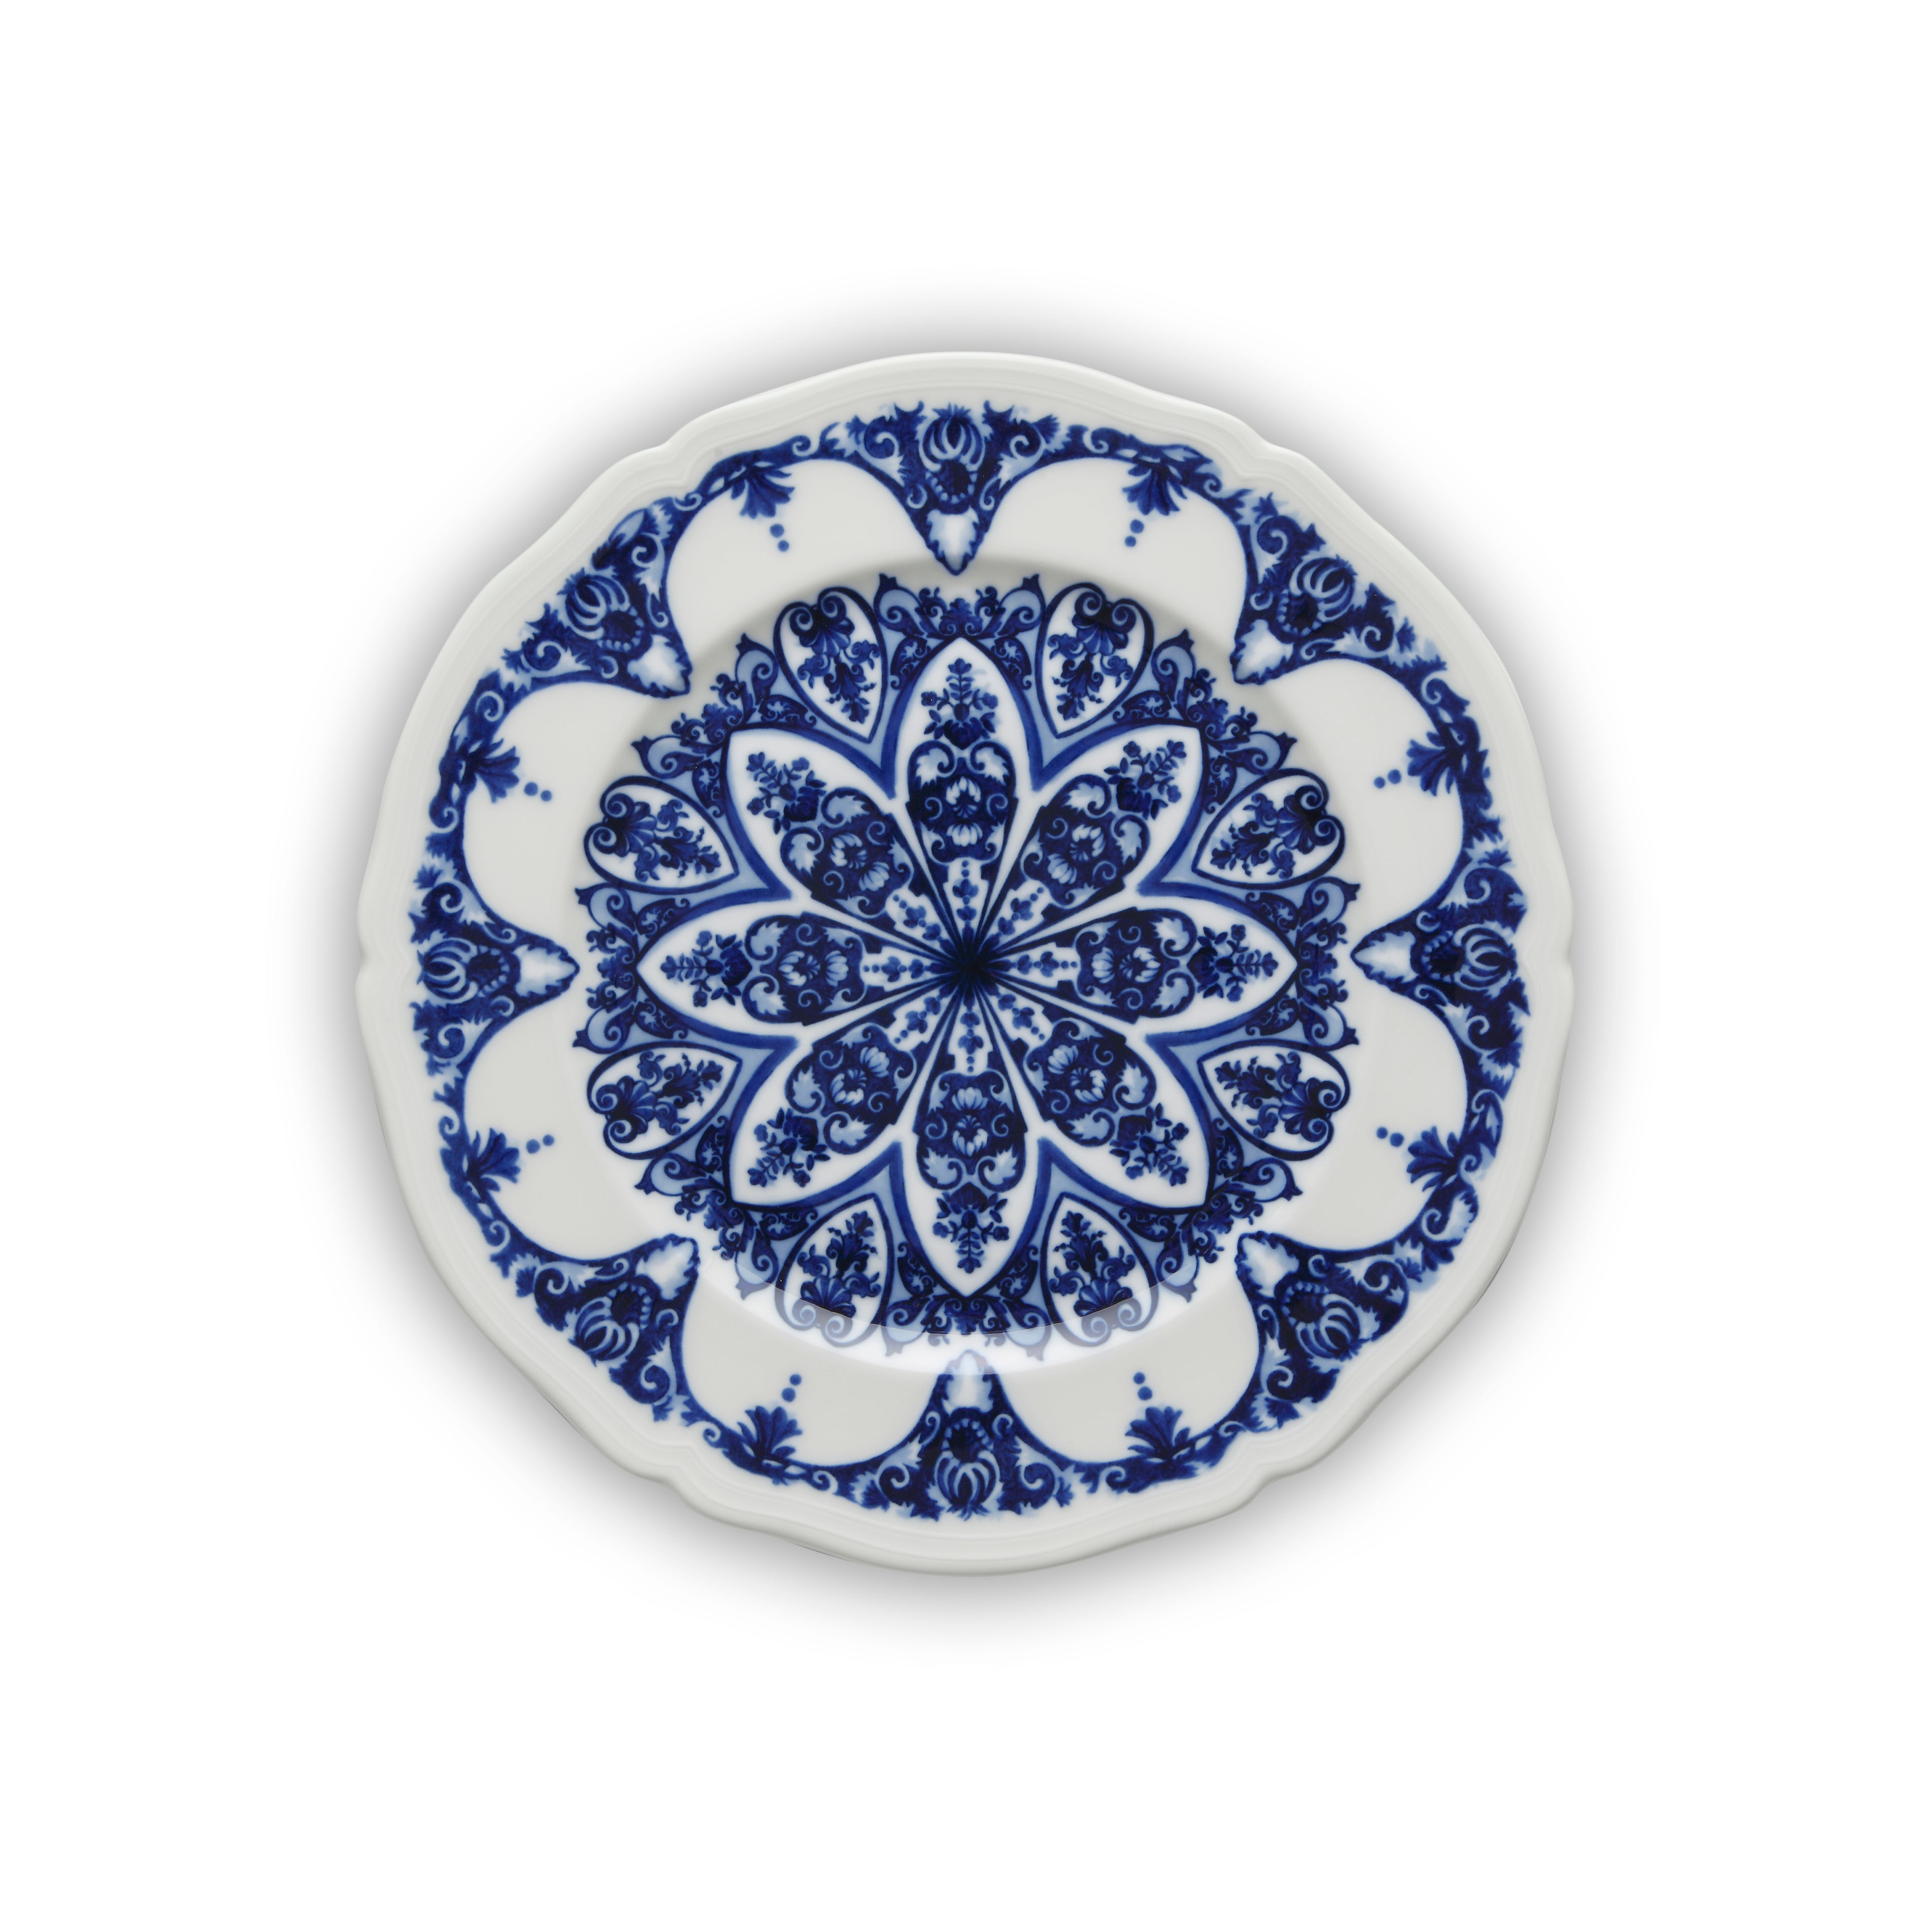 Antico Doccia Charger Plate in Babele Blu, 31cm